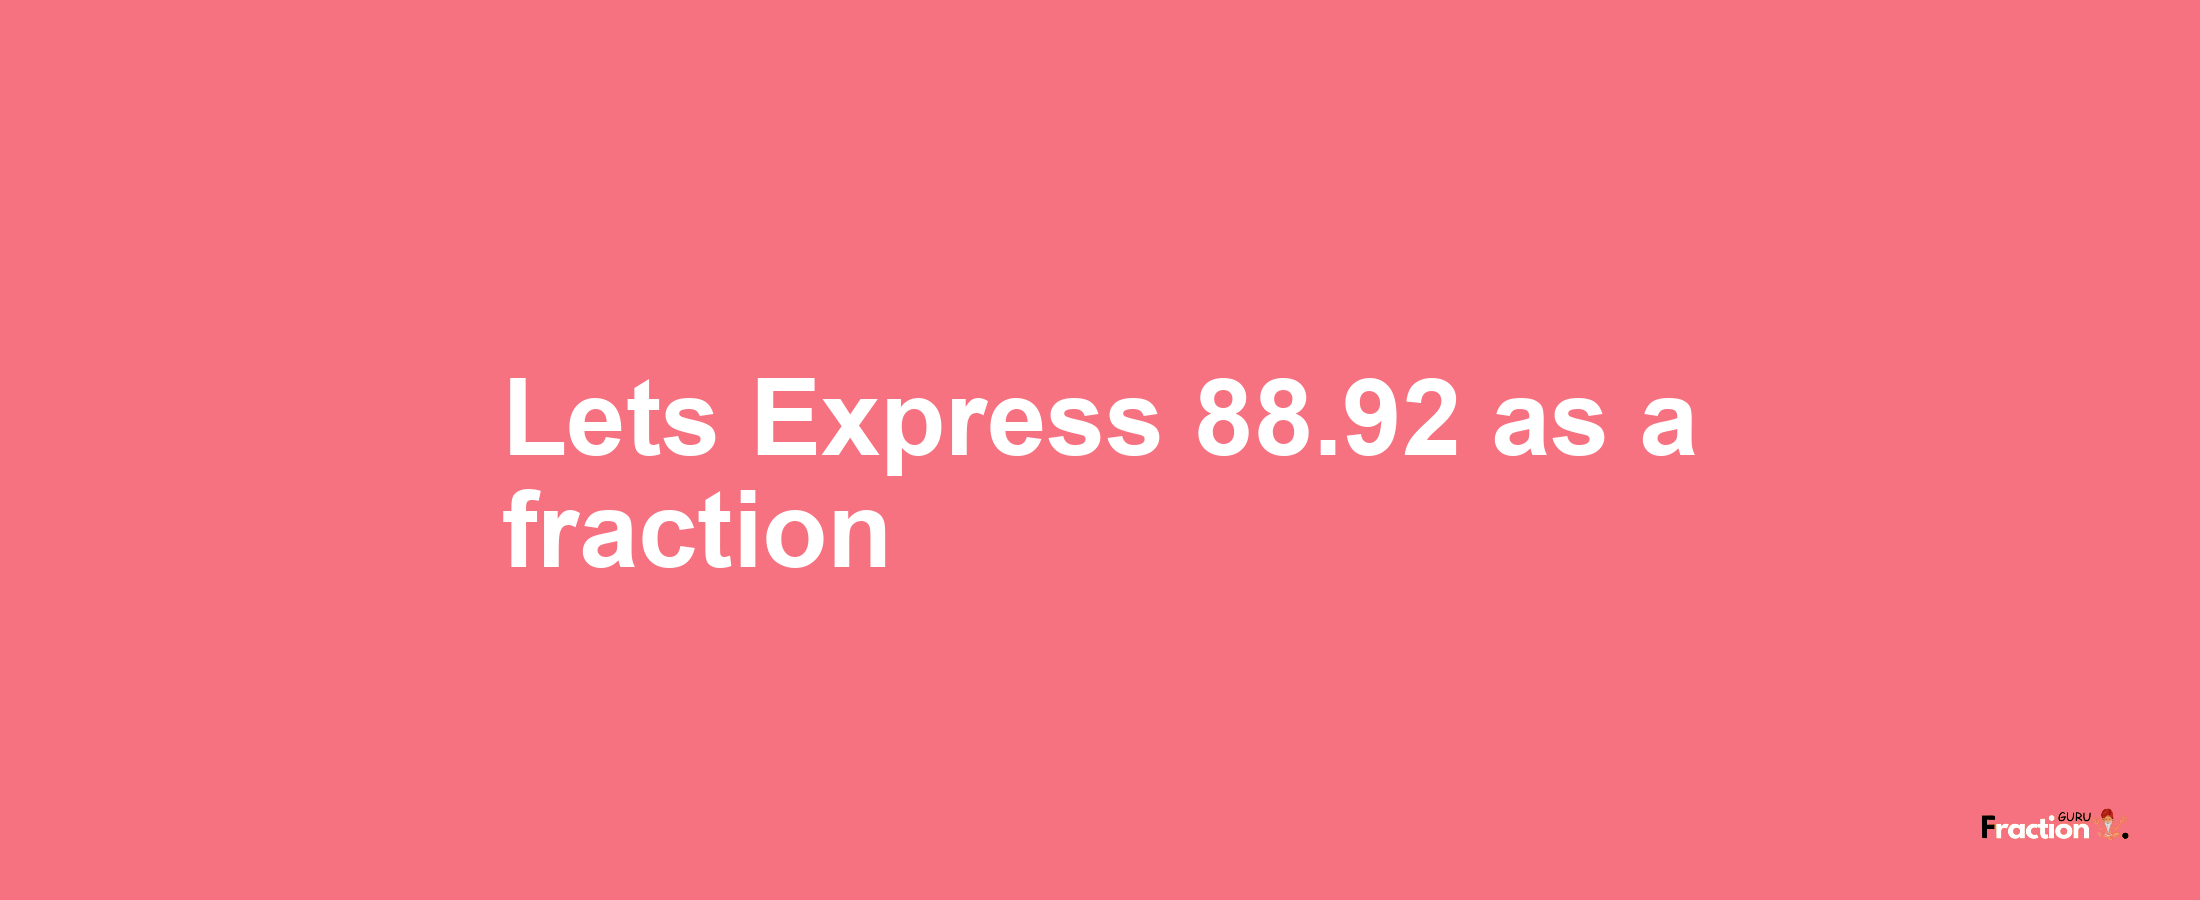 Lets Express 88.92 as afraction